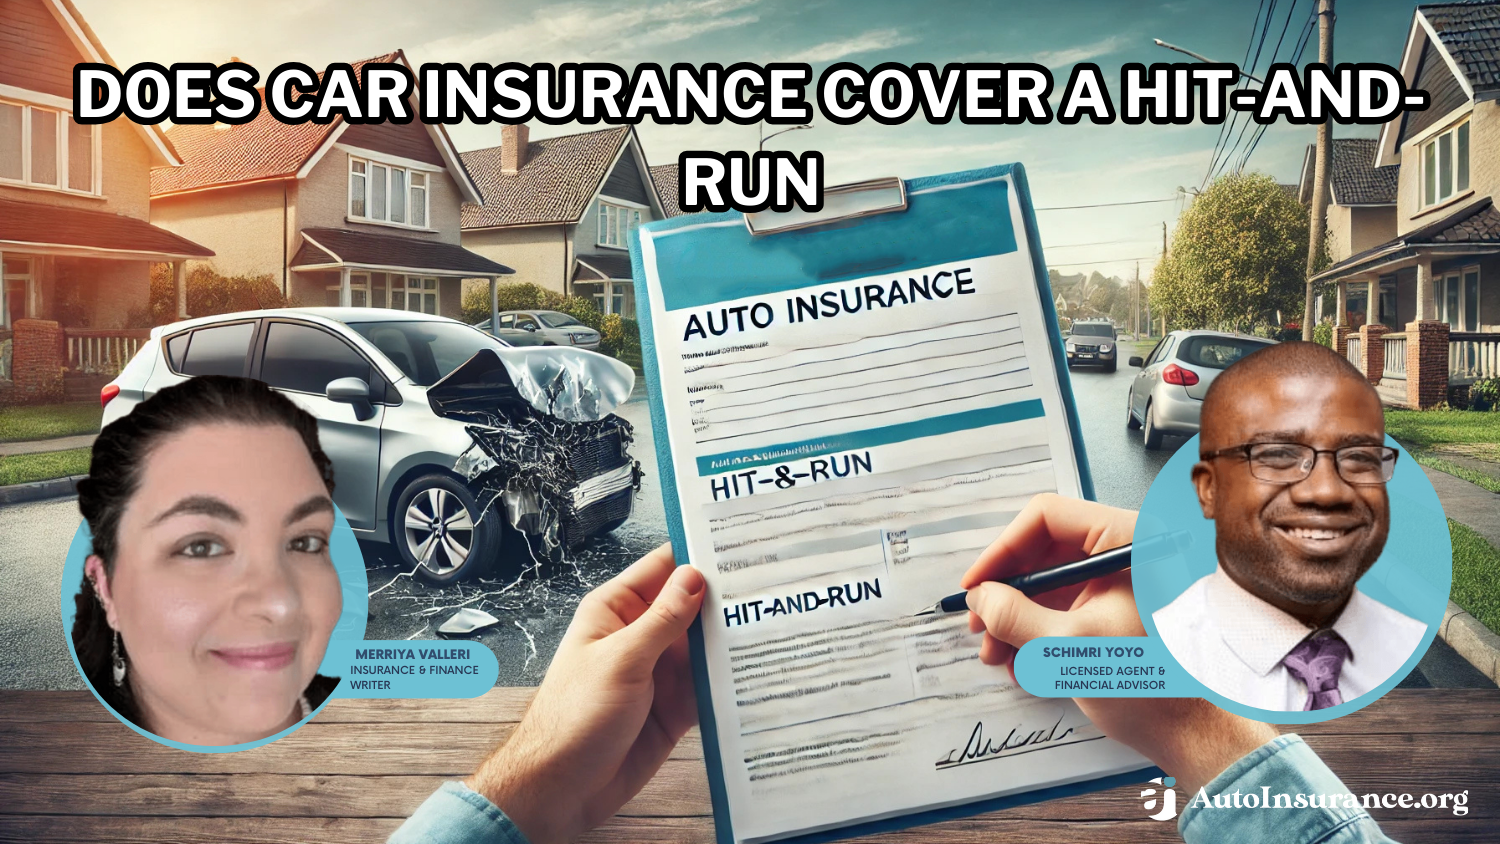 Does car insurance cover a hit-and-run?